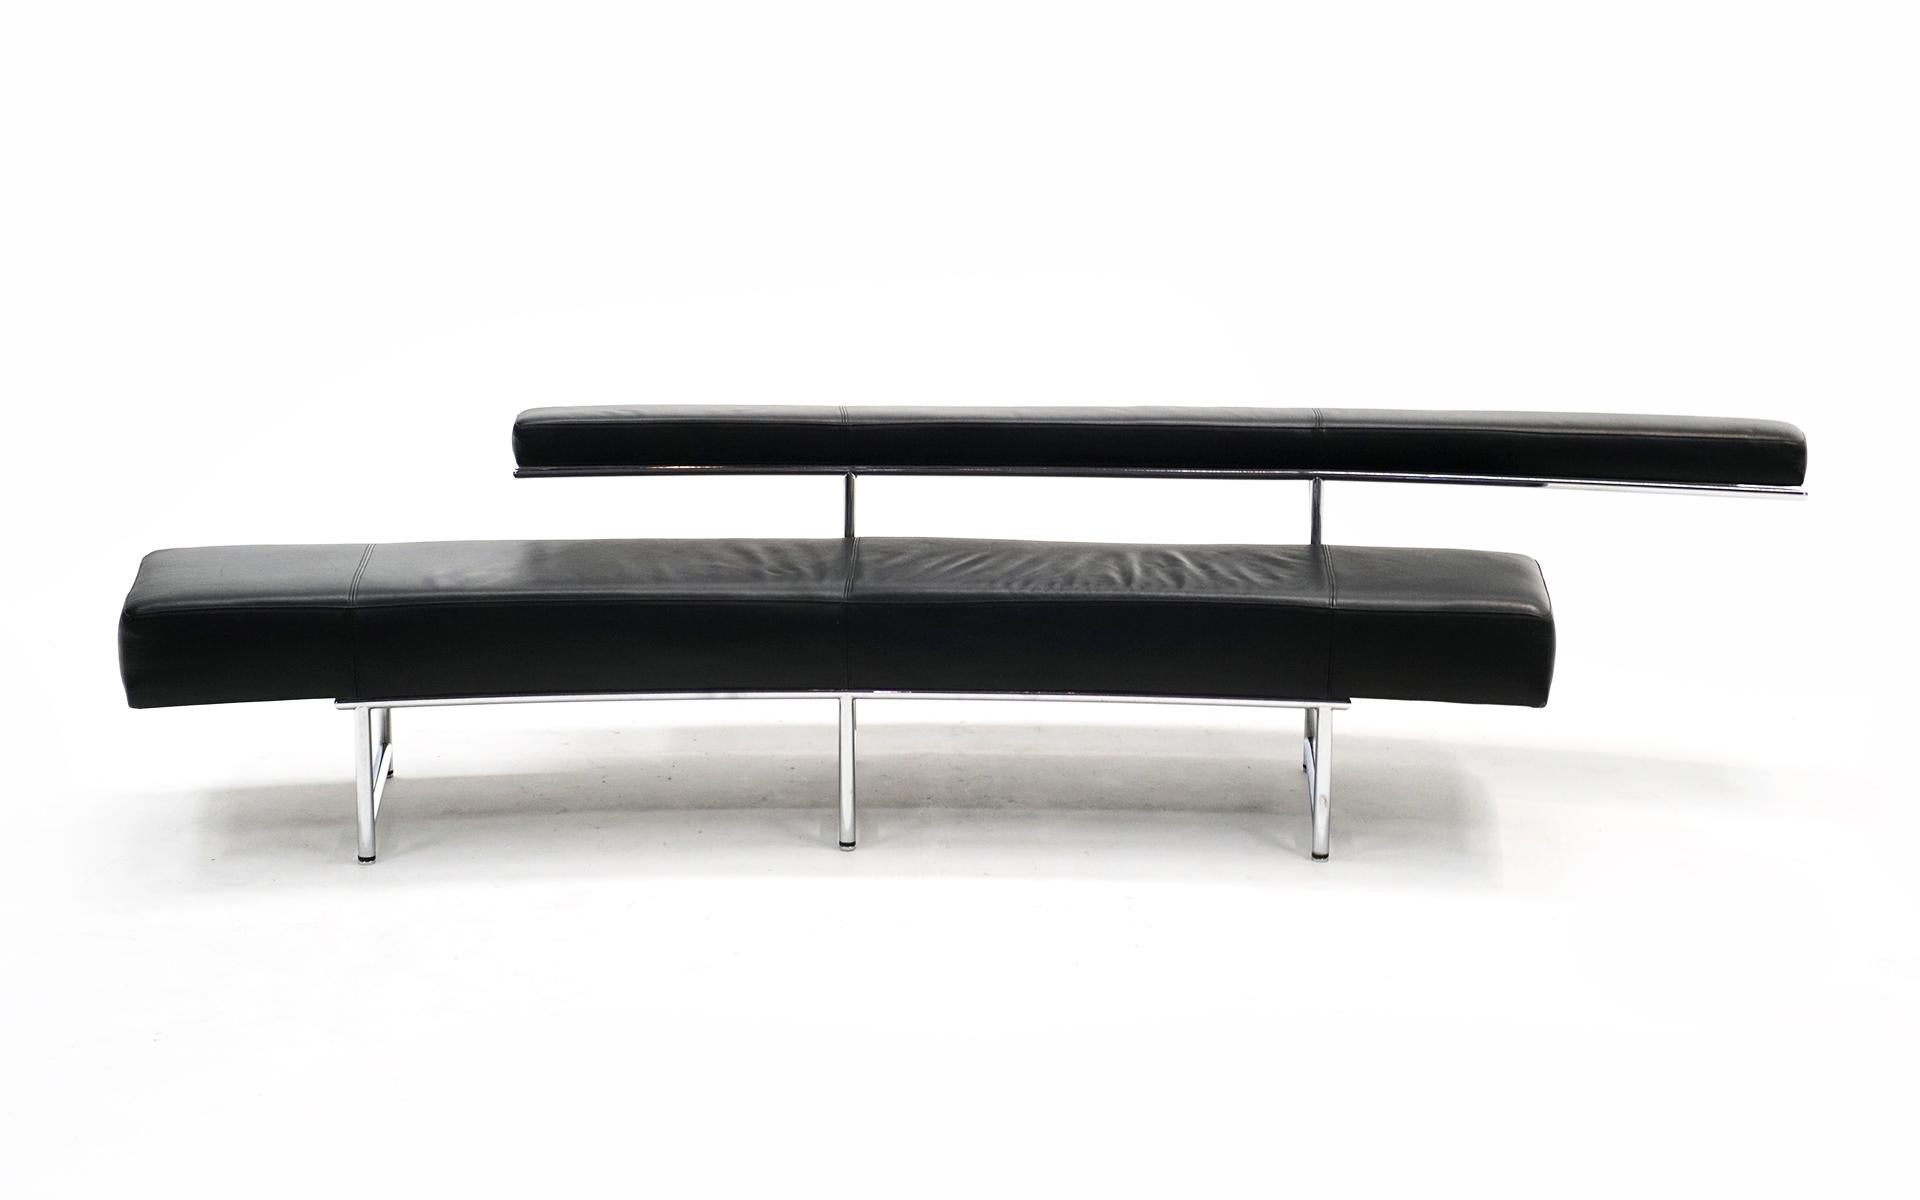 Monte Carlo Sofa designed in Eileen Gray in 1929 and produced by ClassiCon in the 2000s. Curved form in black leather and tubular chrome. This example has see very little use. No scratches, tears, scuffs or repairs to the leather. The frame shows